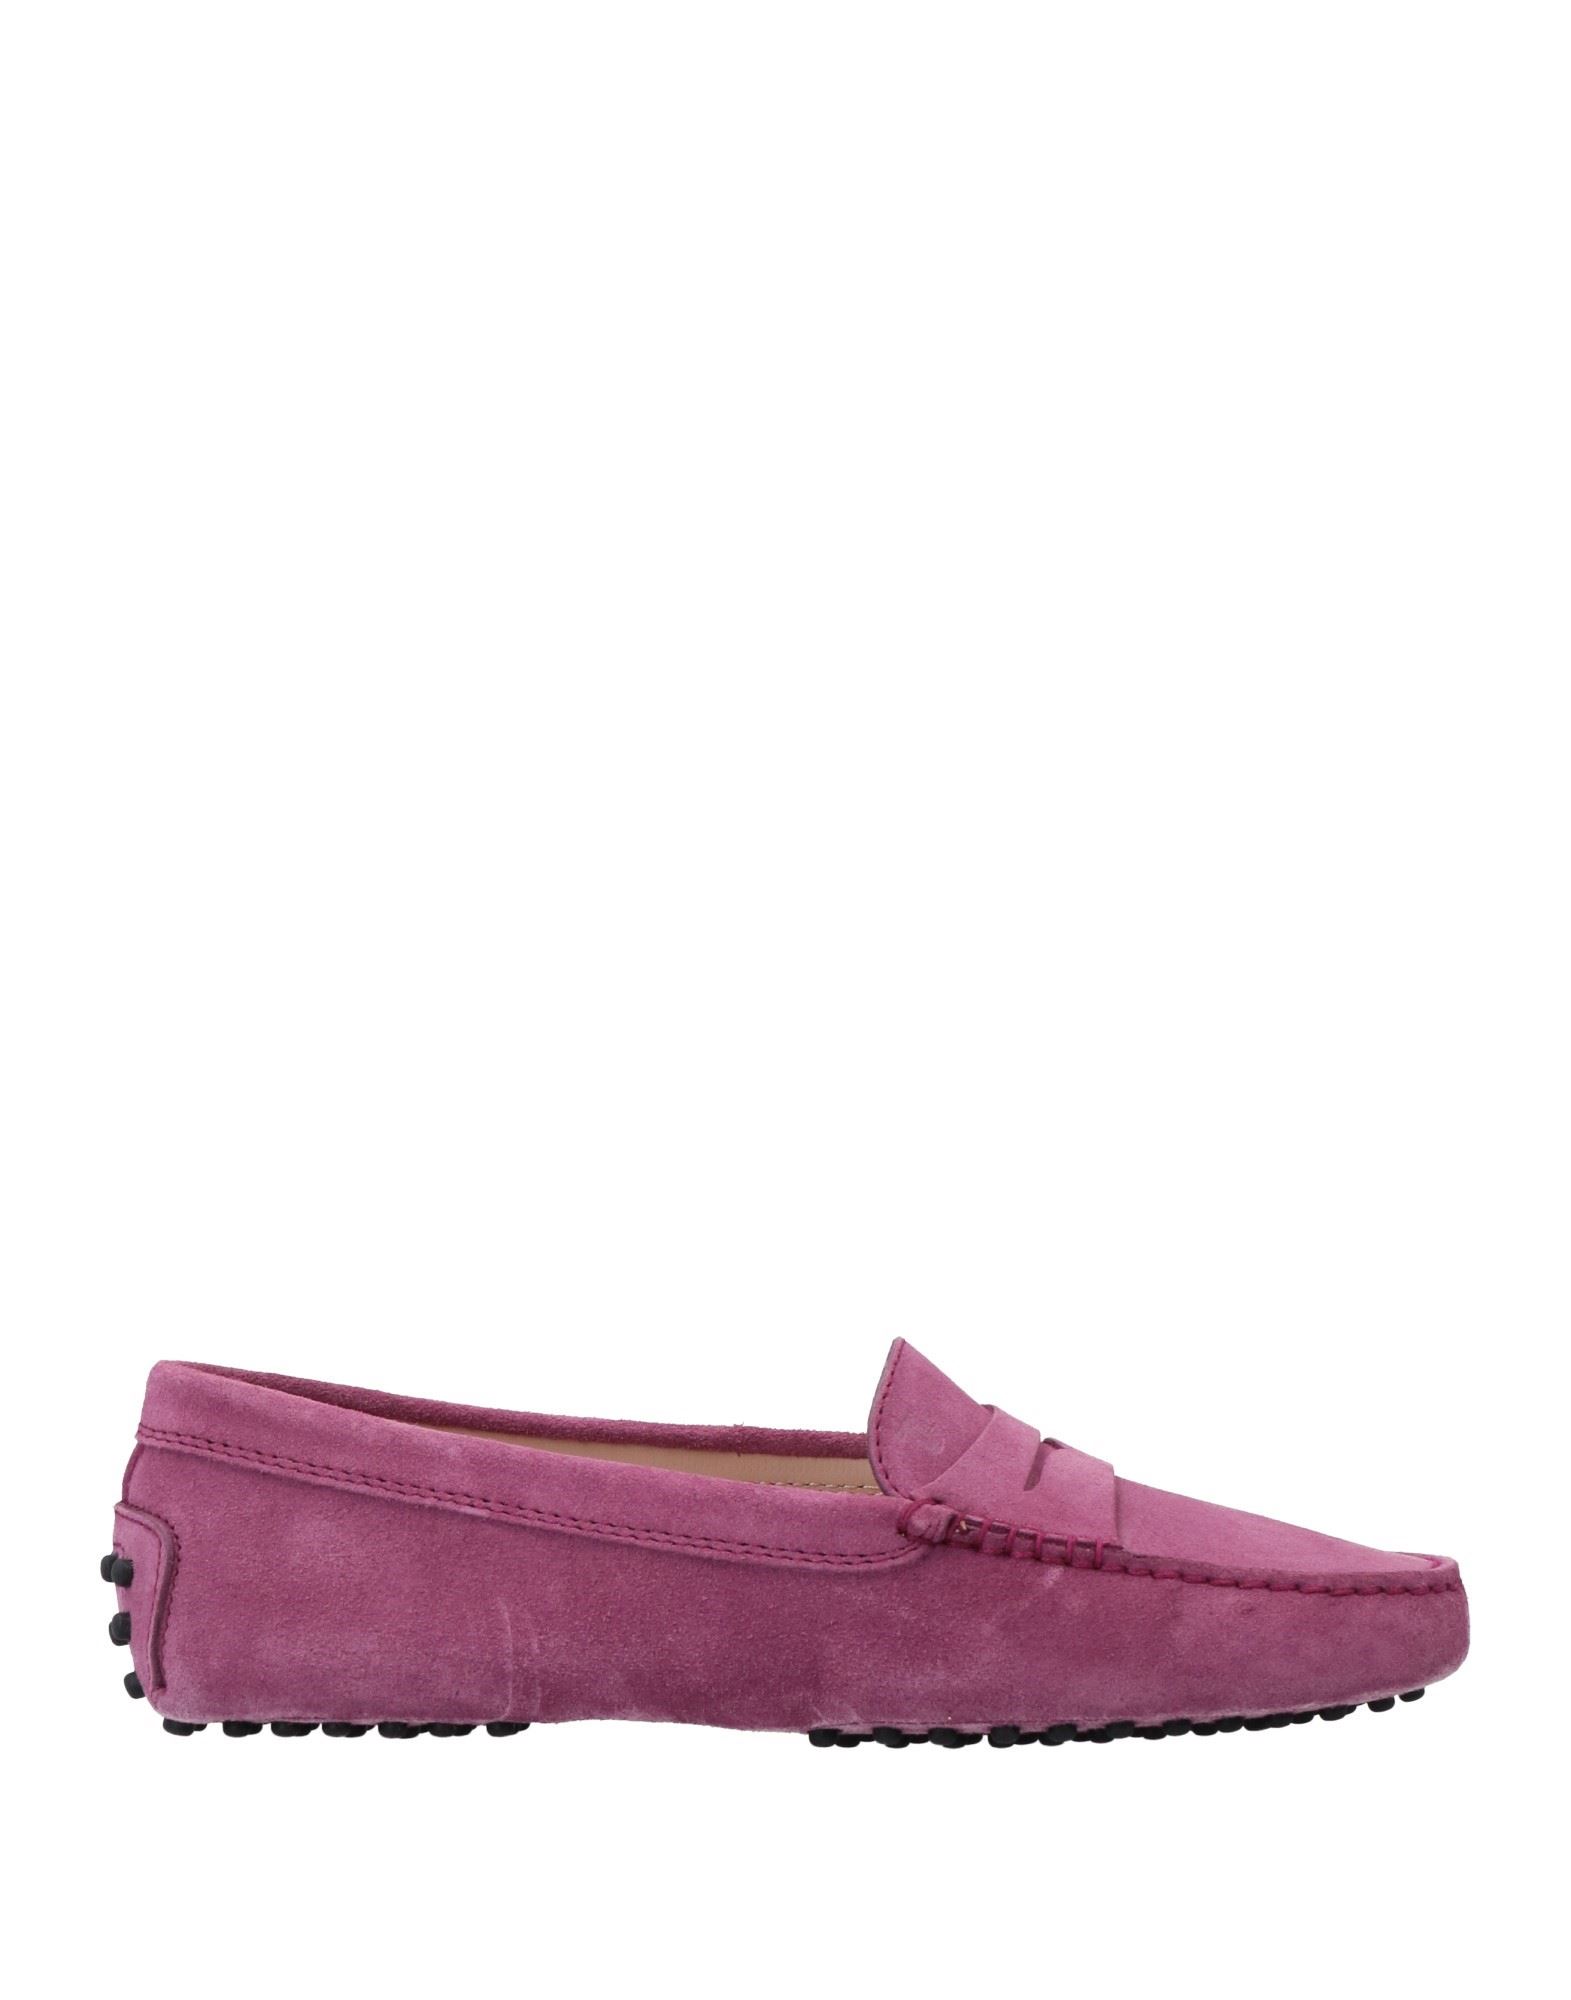 TOD'S TOD'S WOMAN LOAFERS PURPLE SIZE 5.5 SOFT LEATHER